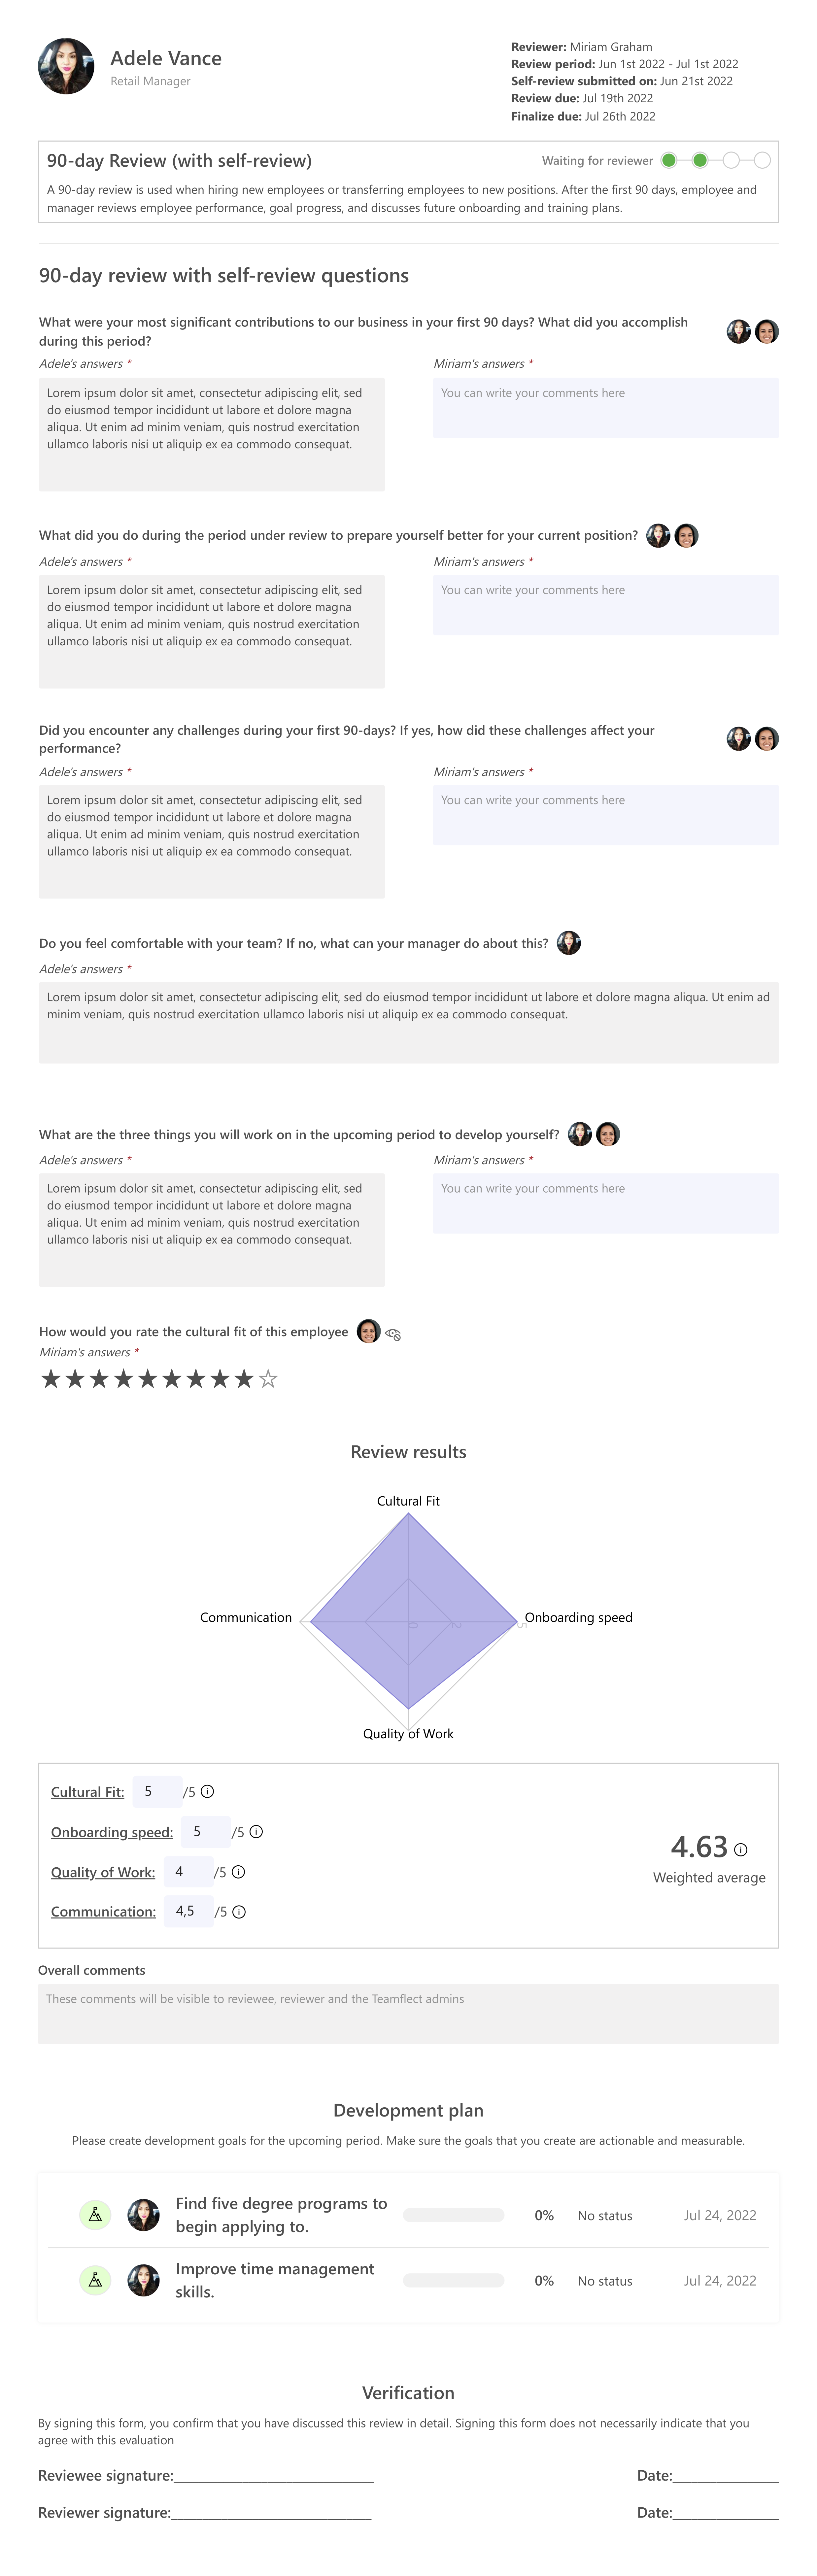 Teamflect role based performance review template in Microsoft Teams